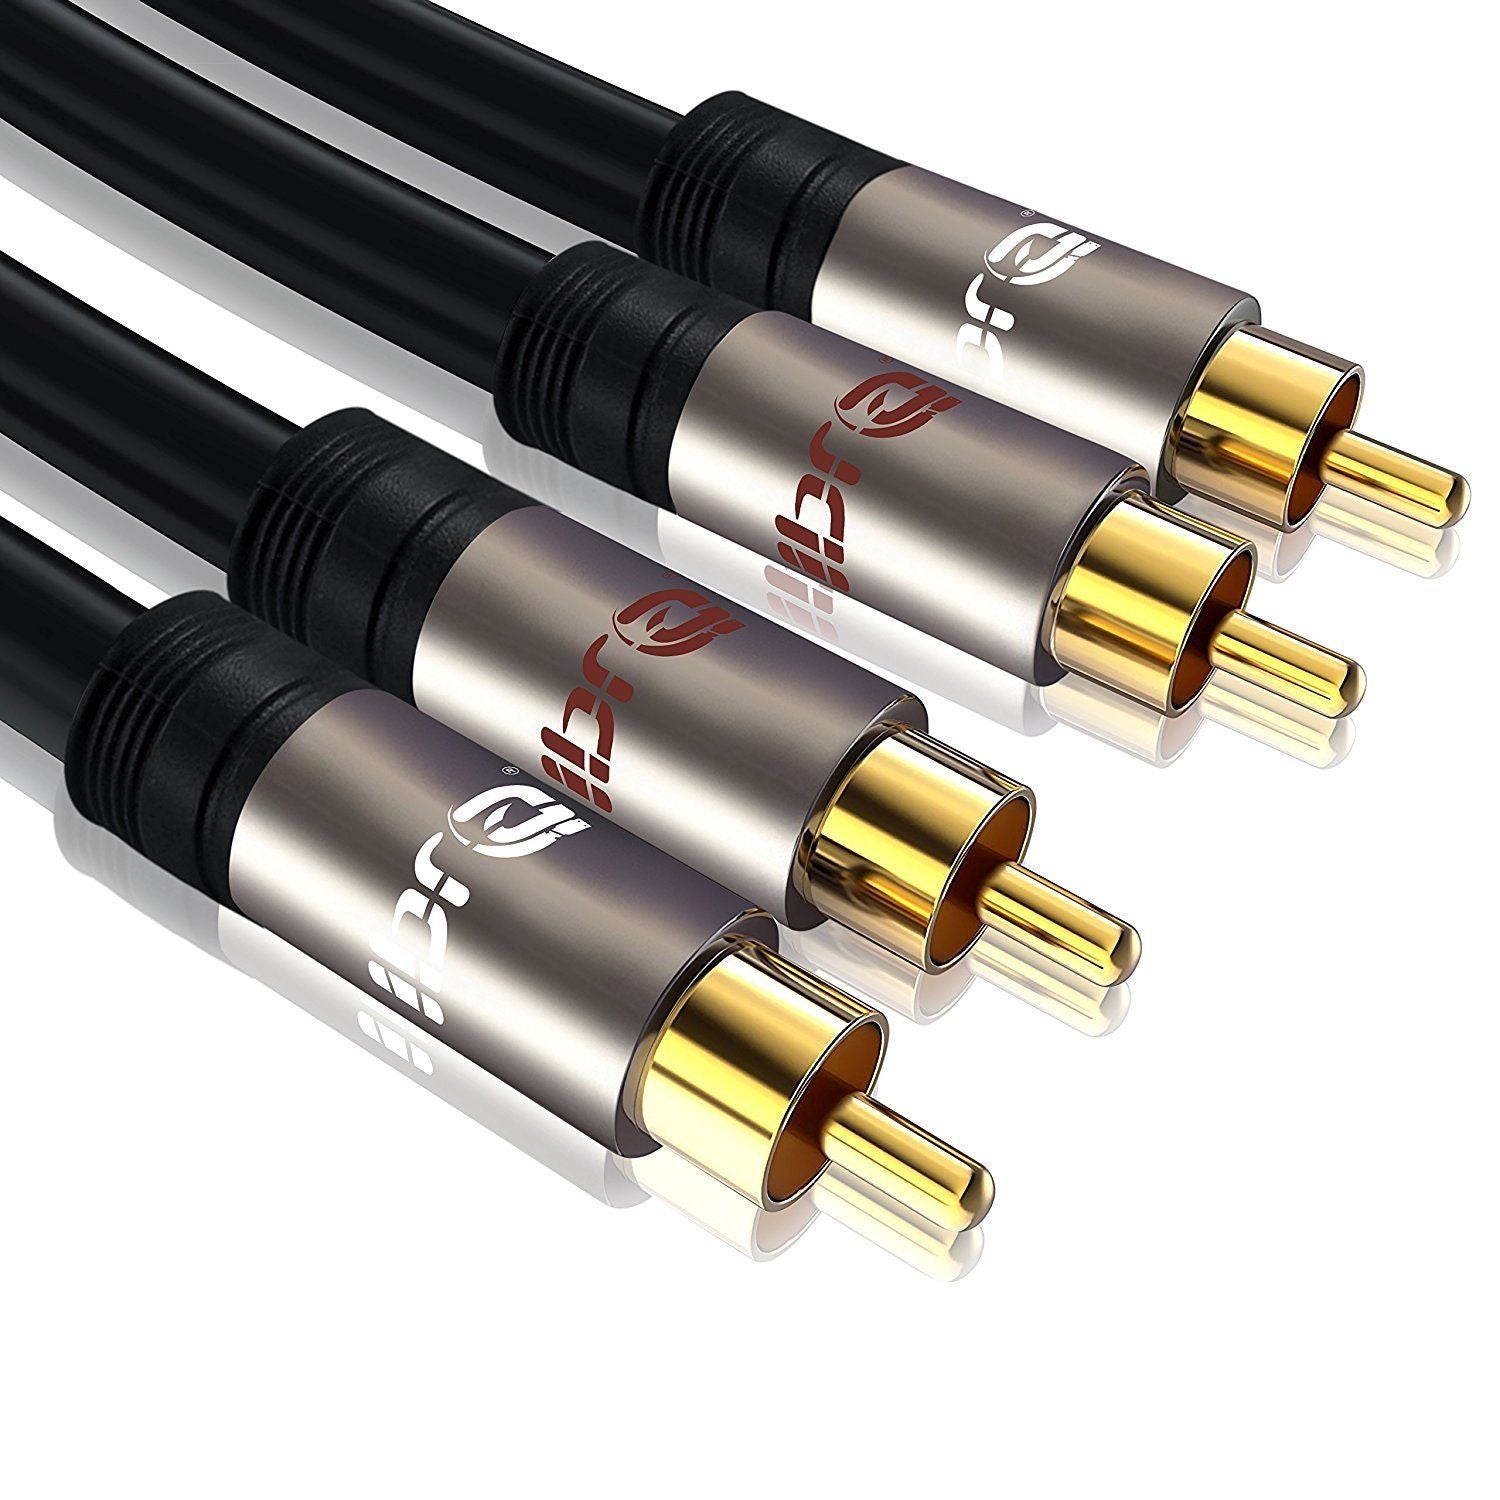 IBRA 5M 2RCA Male to 2RCA Male High Quality Home Theater Audio Cable -2RCA TO 2RCA Cable - Gun Metal Range